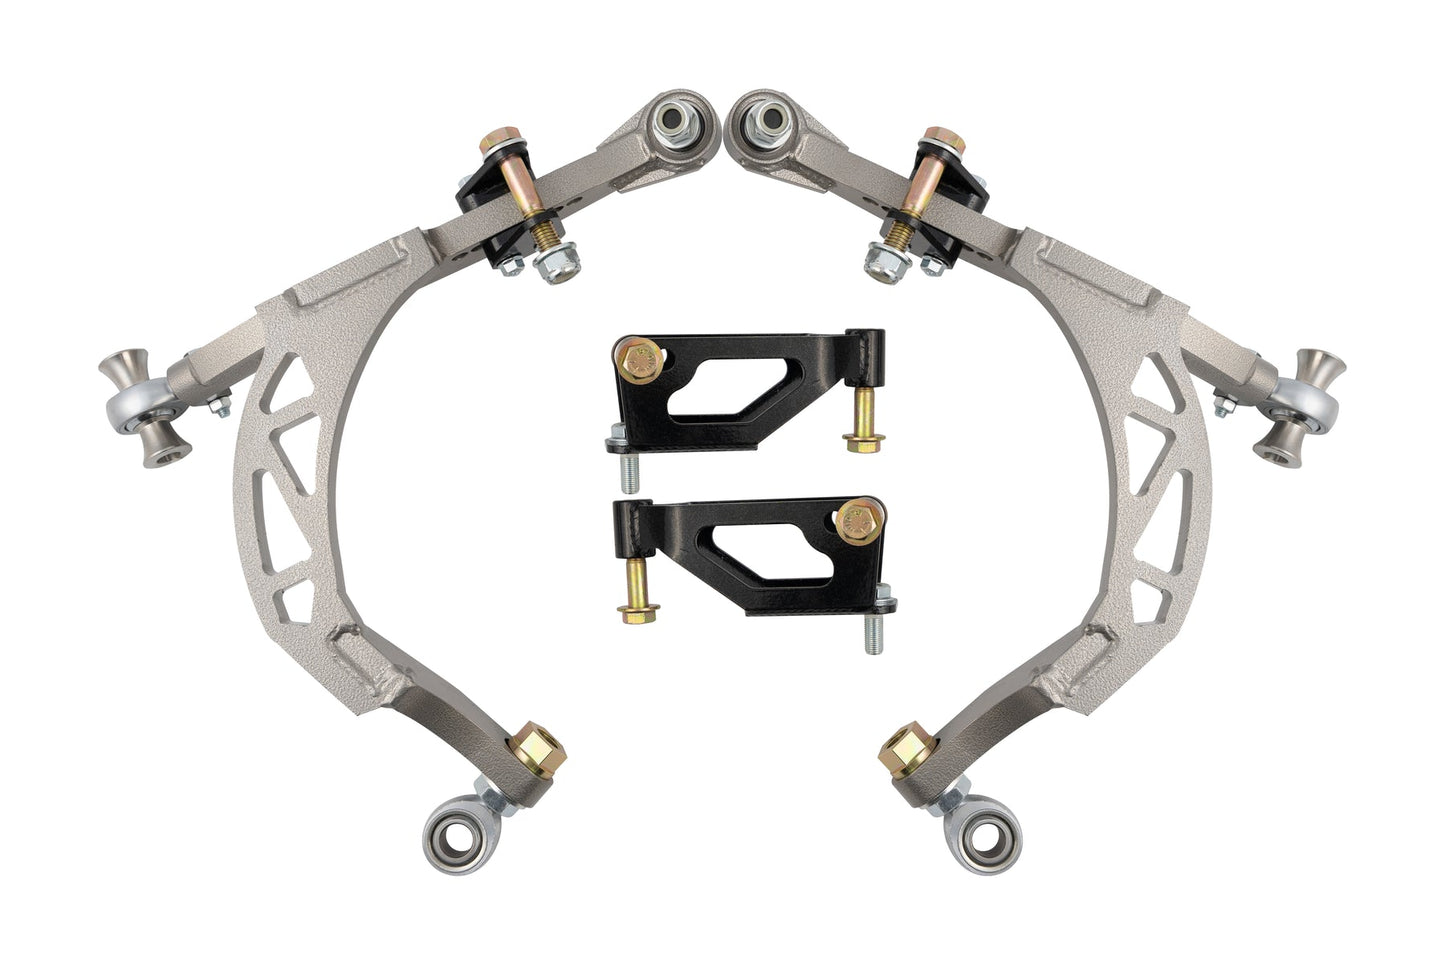 FDF - 370Z HIGH CLEARANCE FRONT LOWER CONTROL ARMS